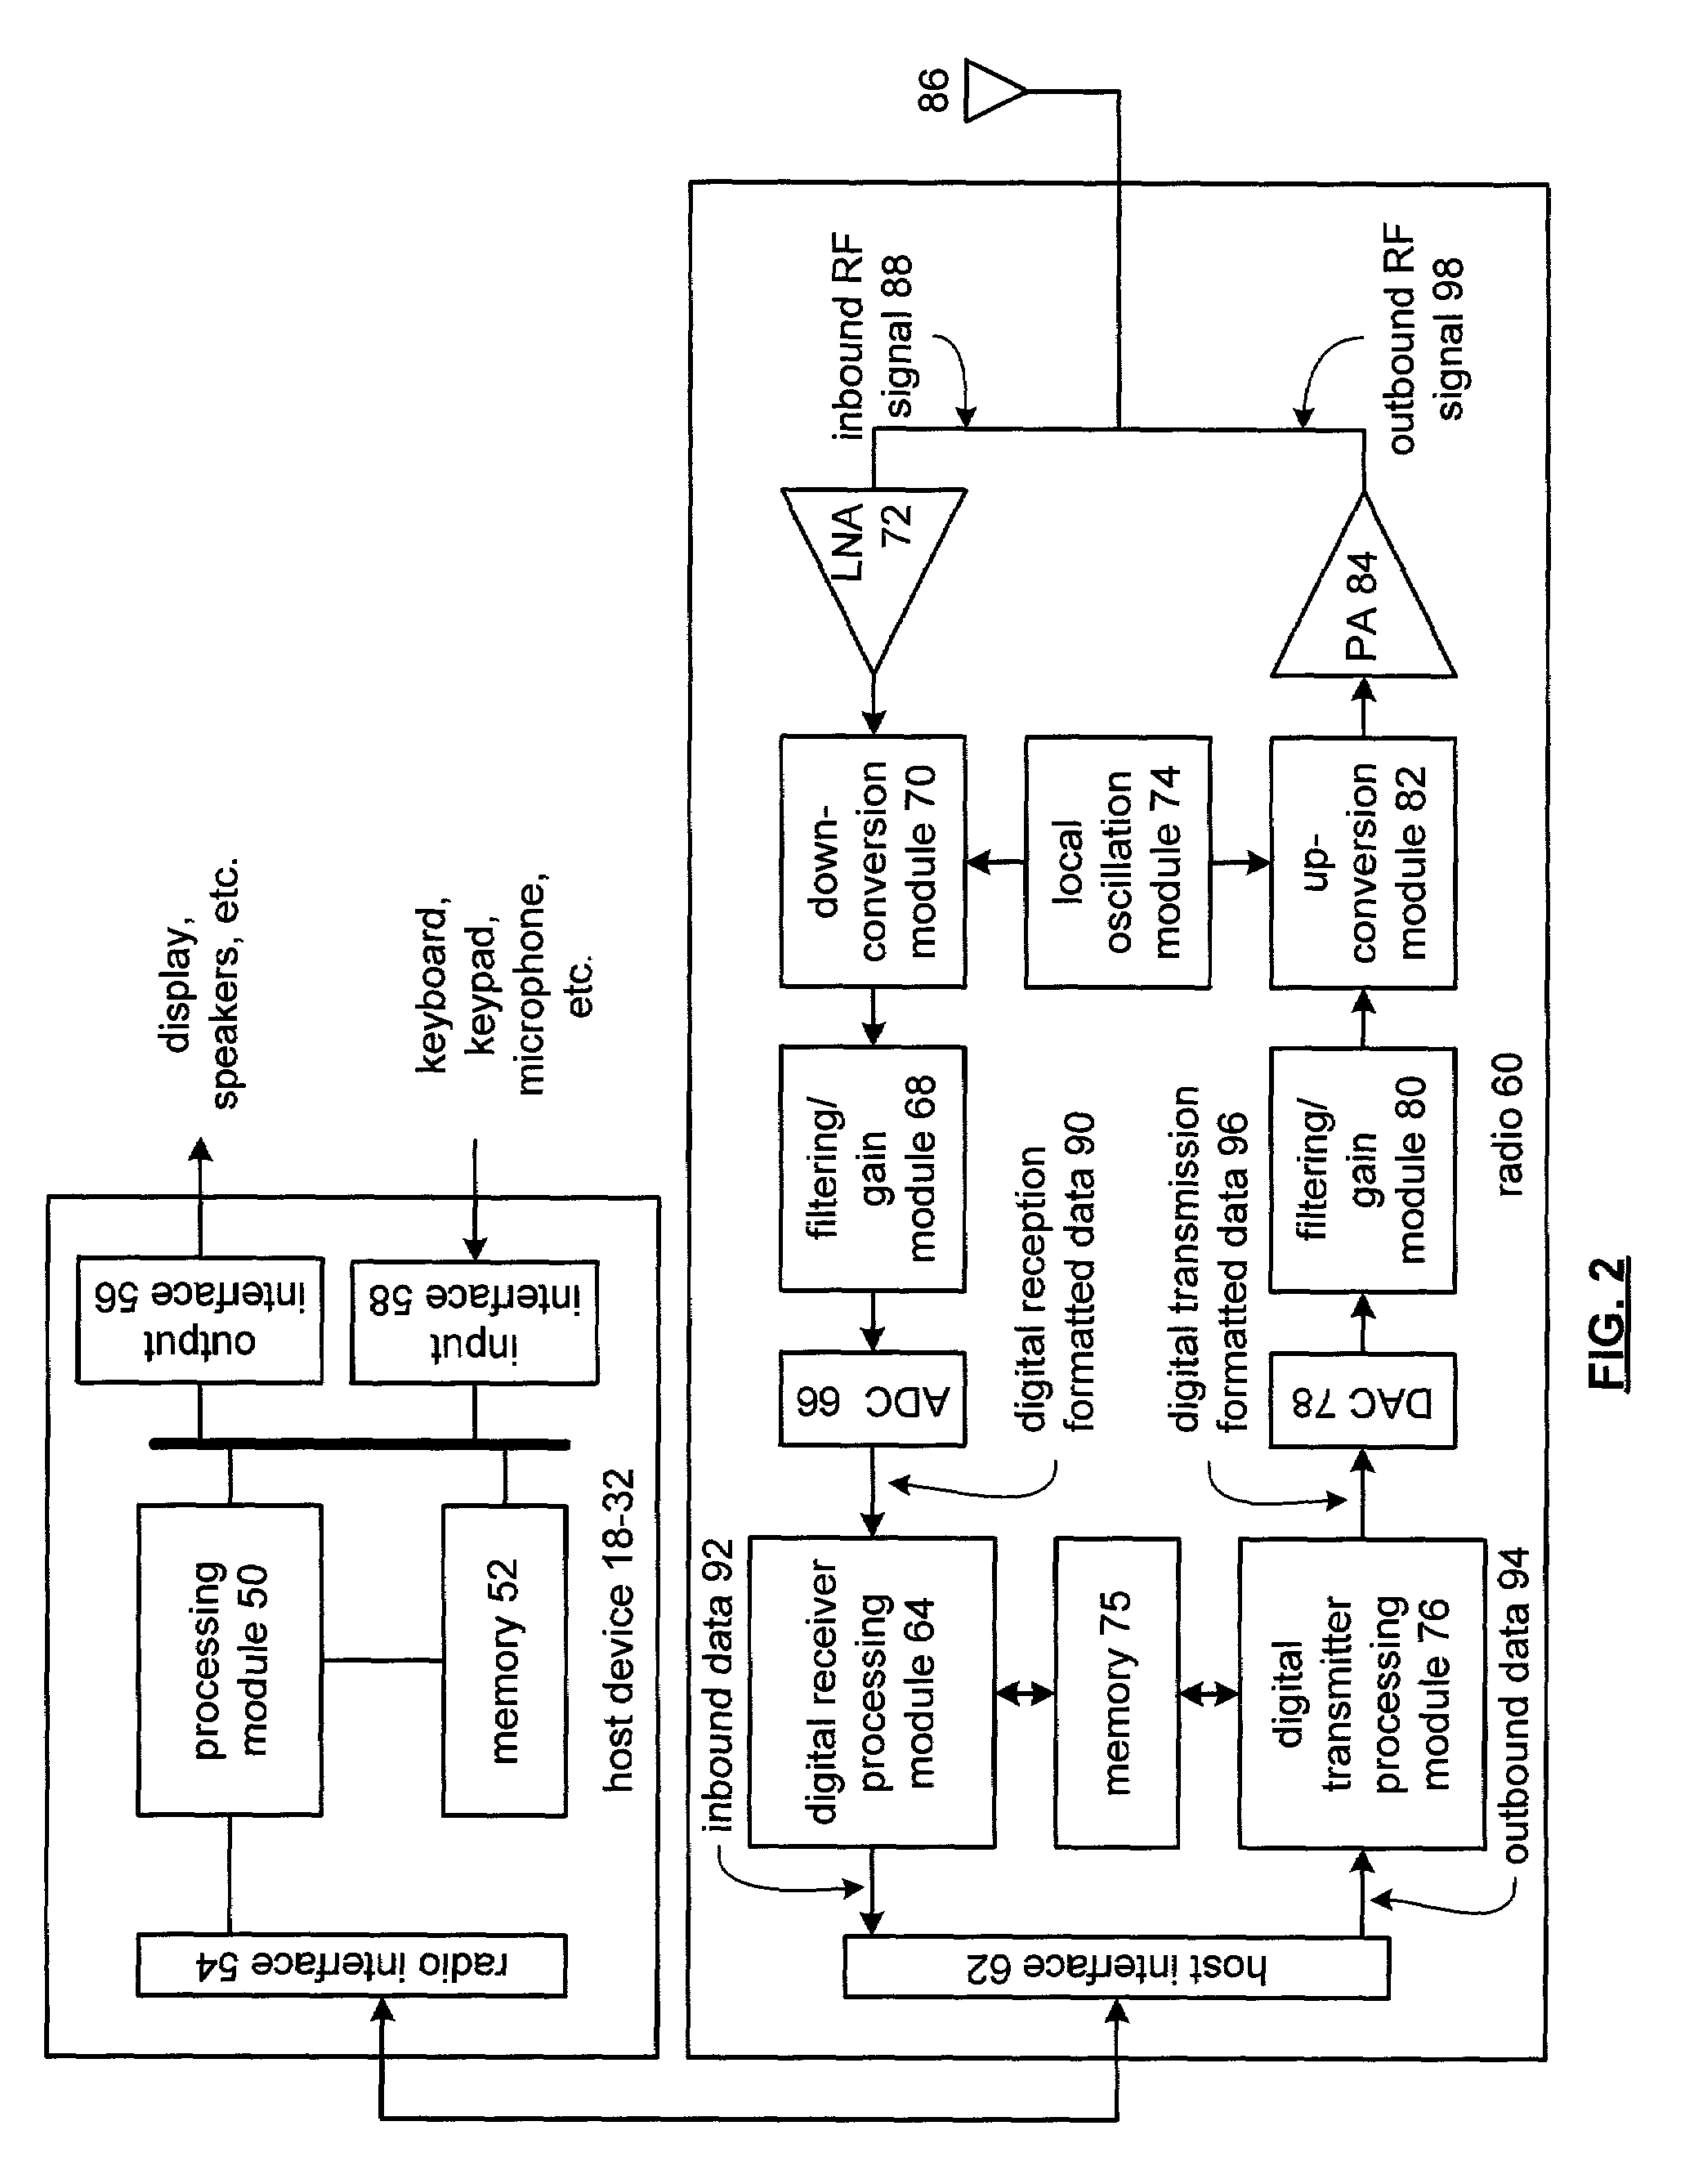 Programmable mutlistage amplifier and radio applications thereof